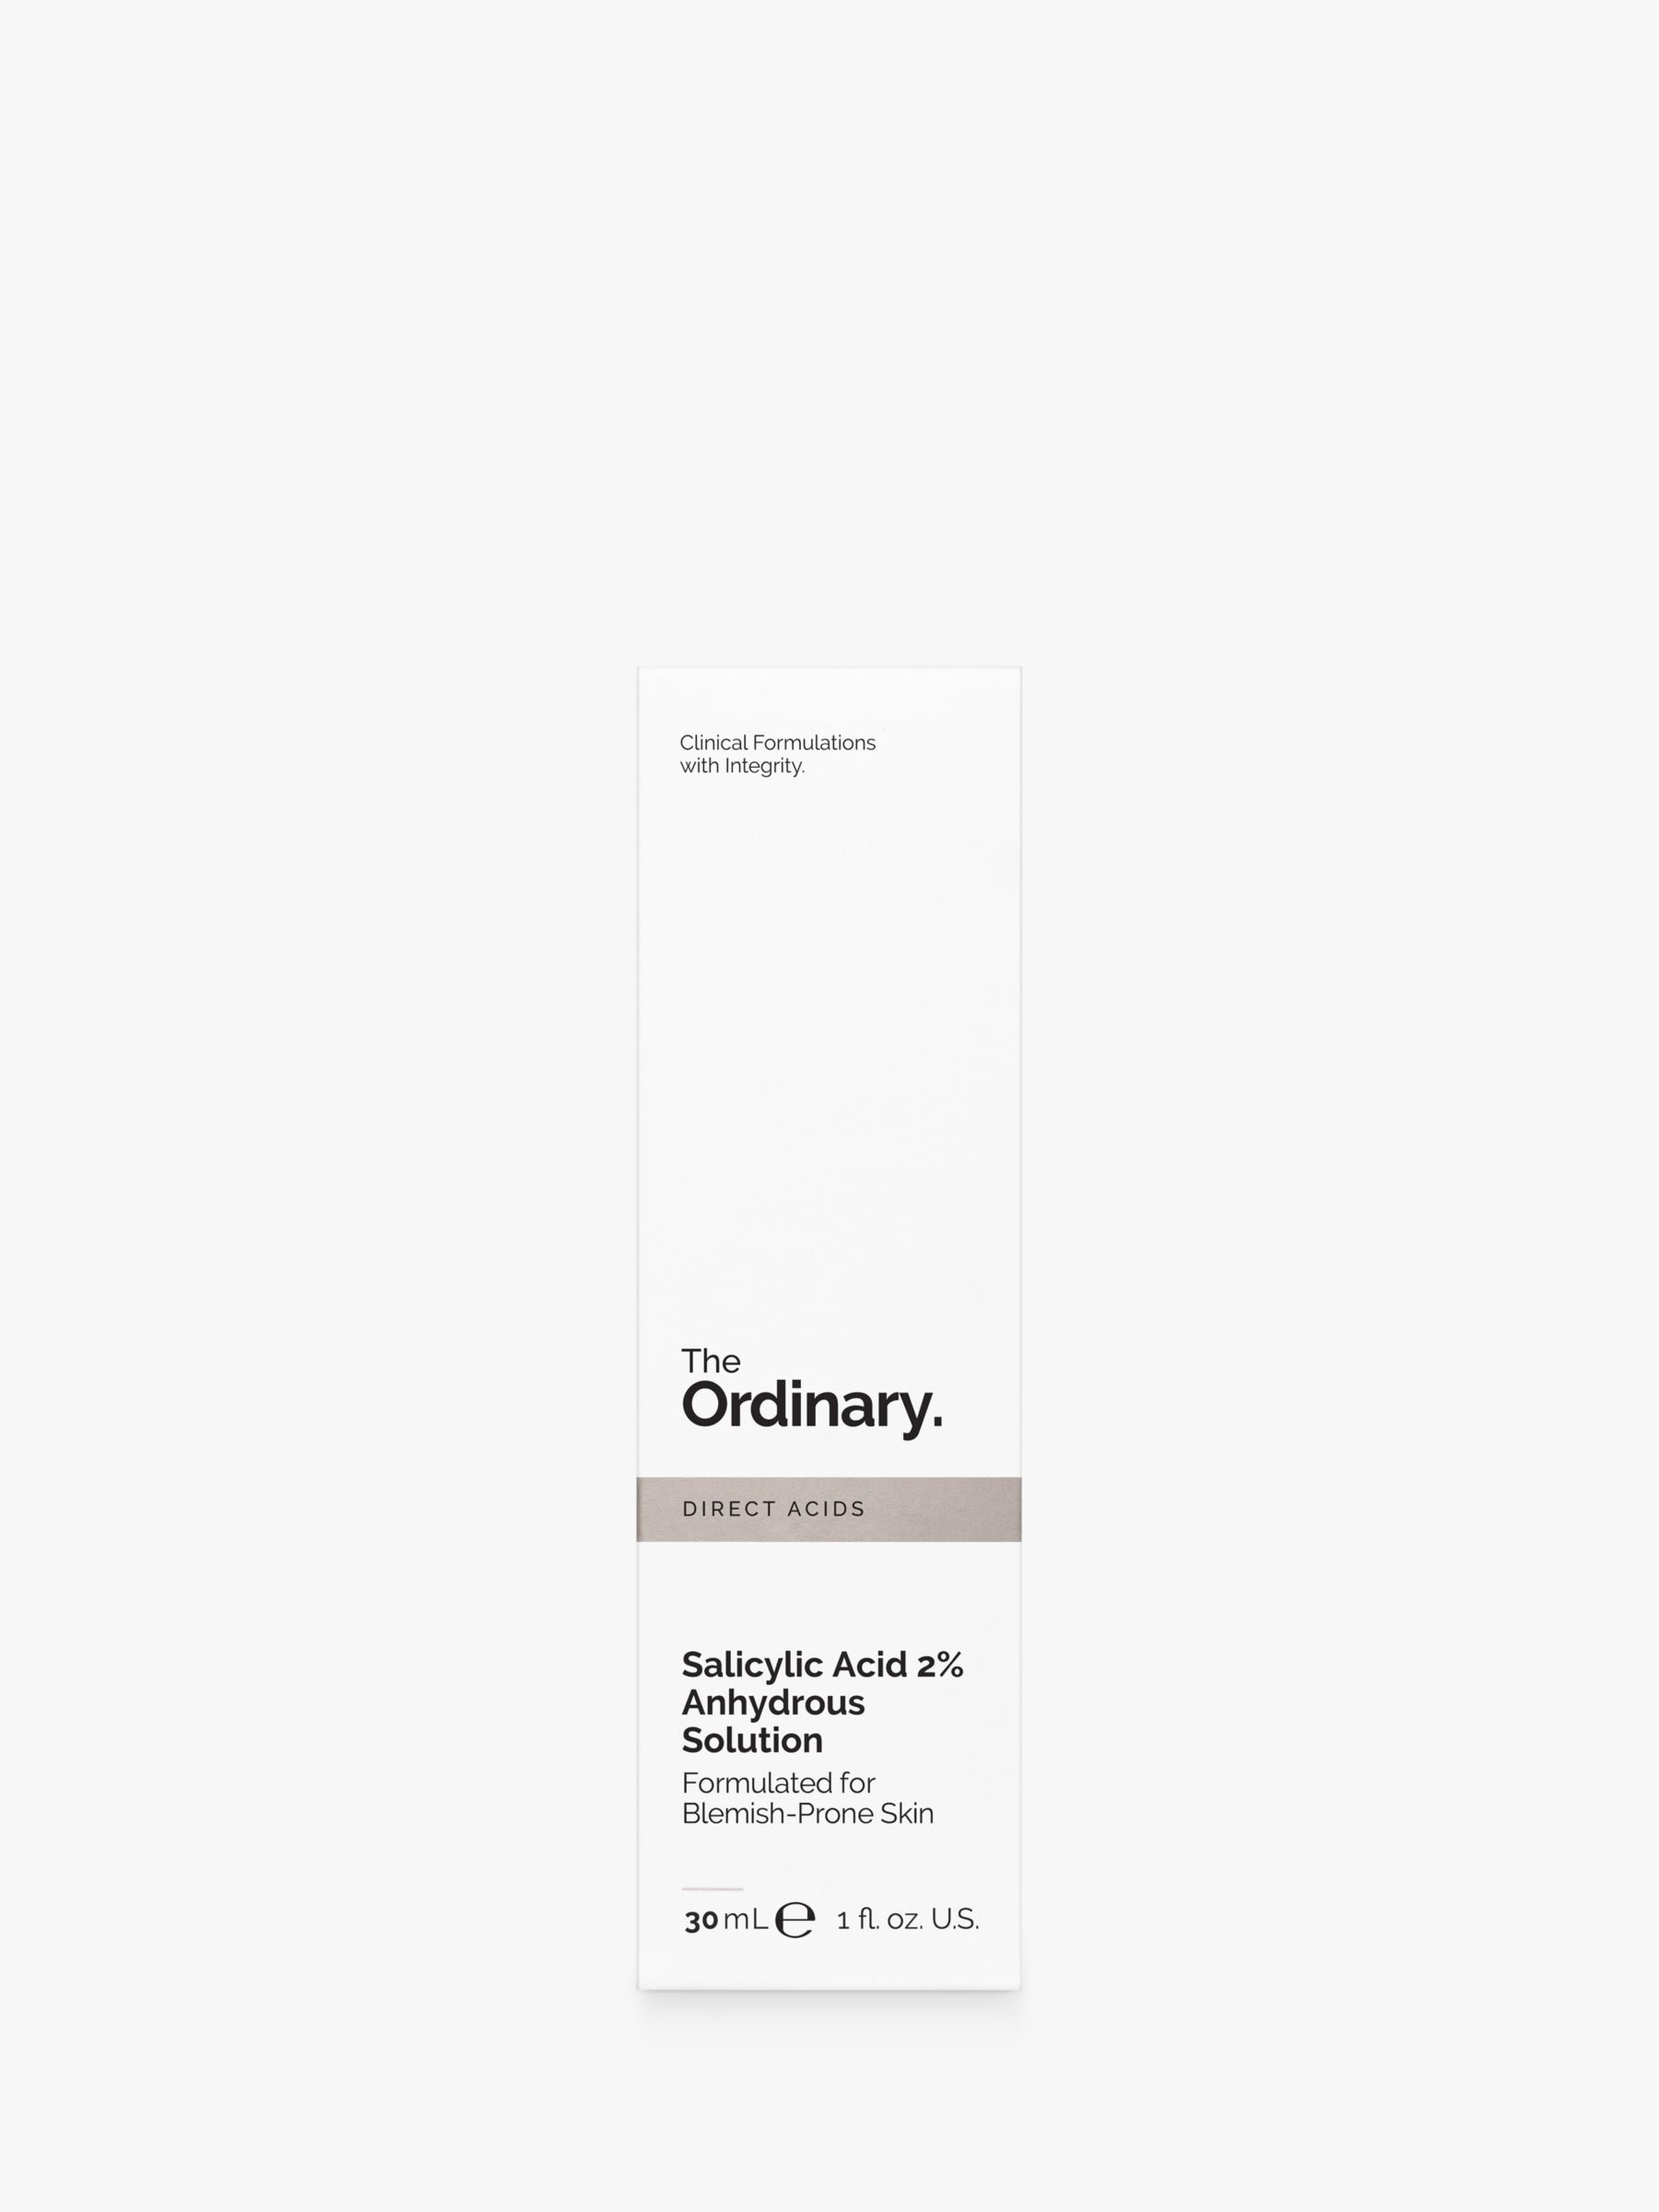 The Ordinary Salicylic Acid 2% Anhydrous Solution, 30ml 3